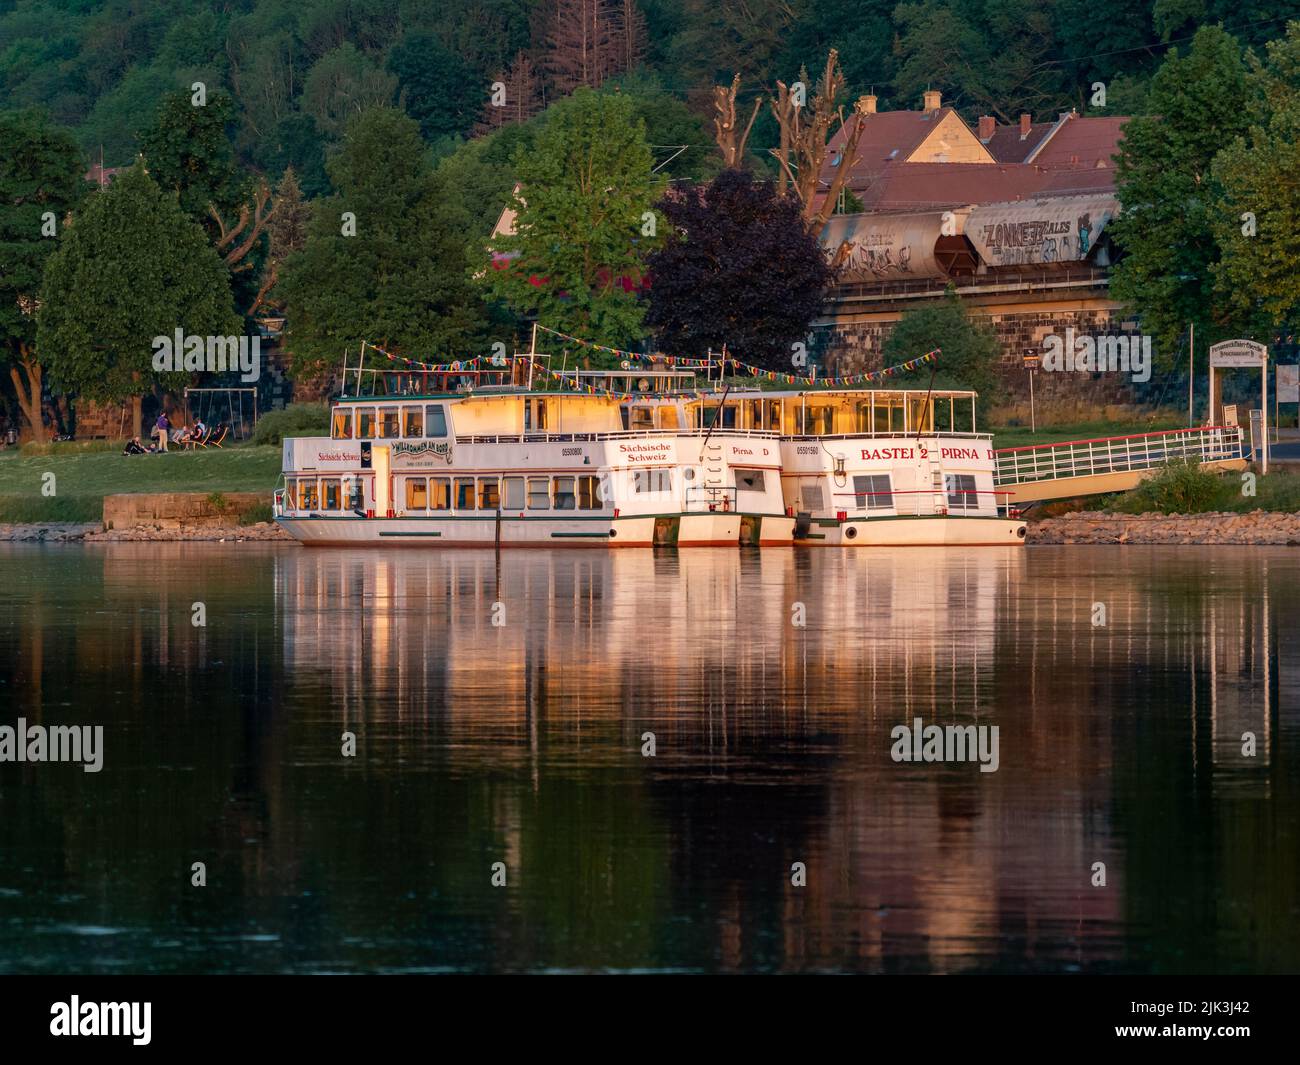 Boats on the Elbe river are waiting. The boat ride on the water is a famous tourist attraction. The sunset light is shining on the ships and the water Stock Photo